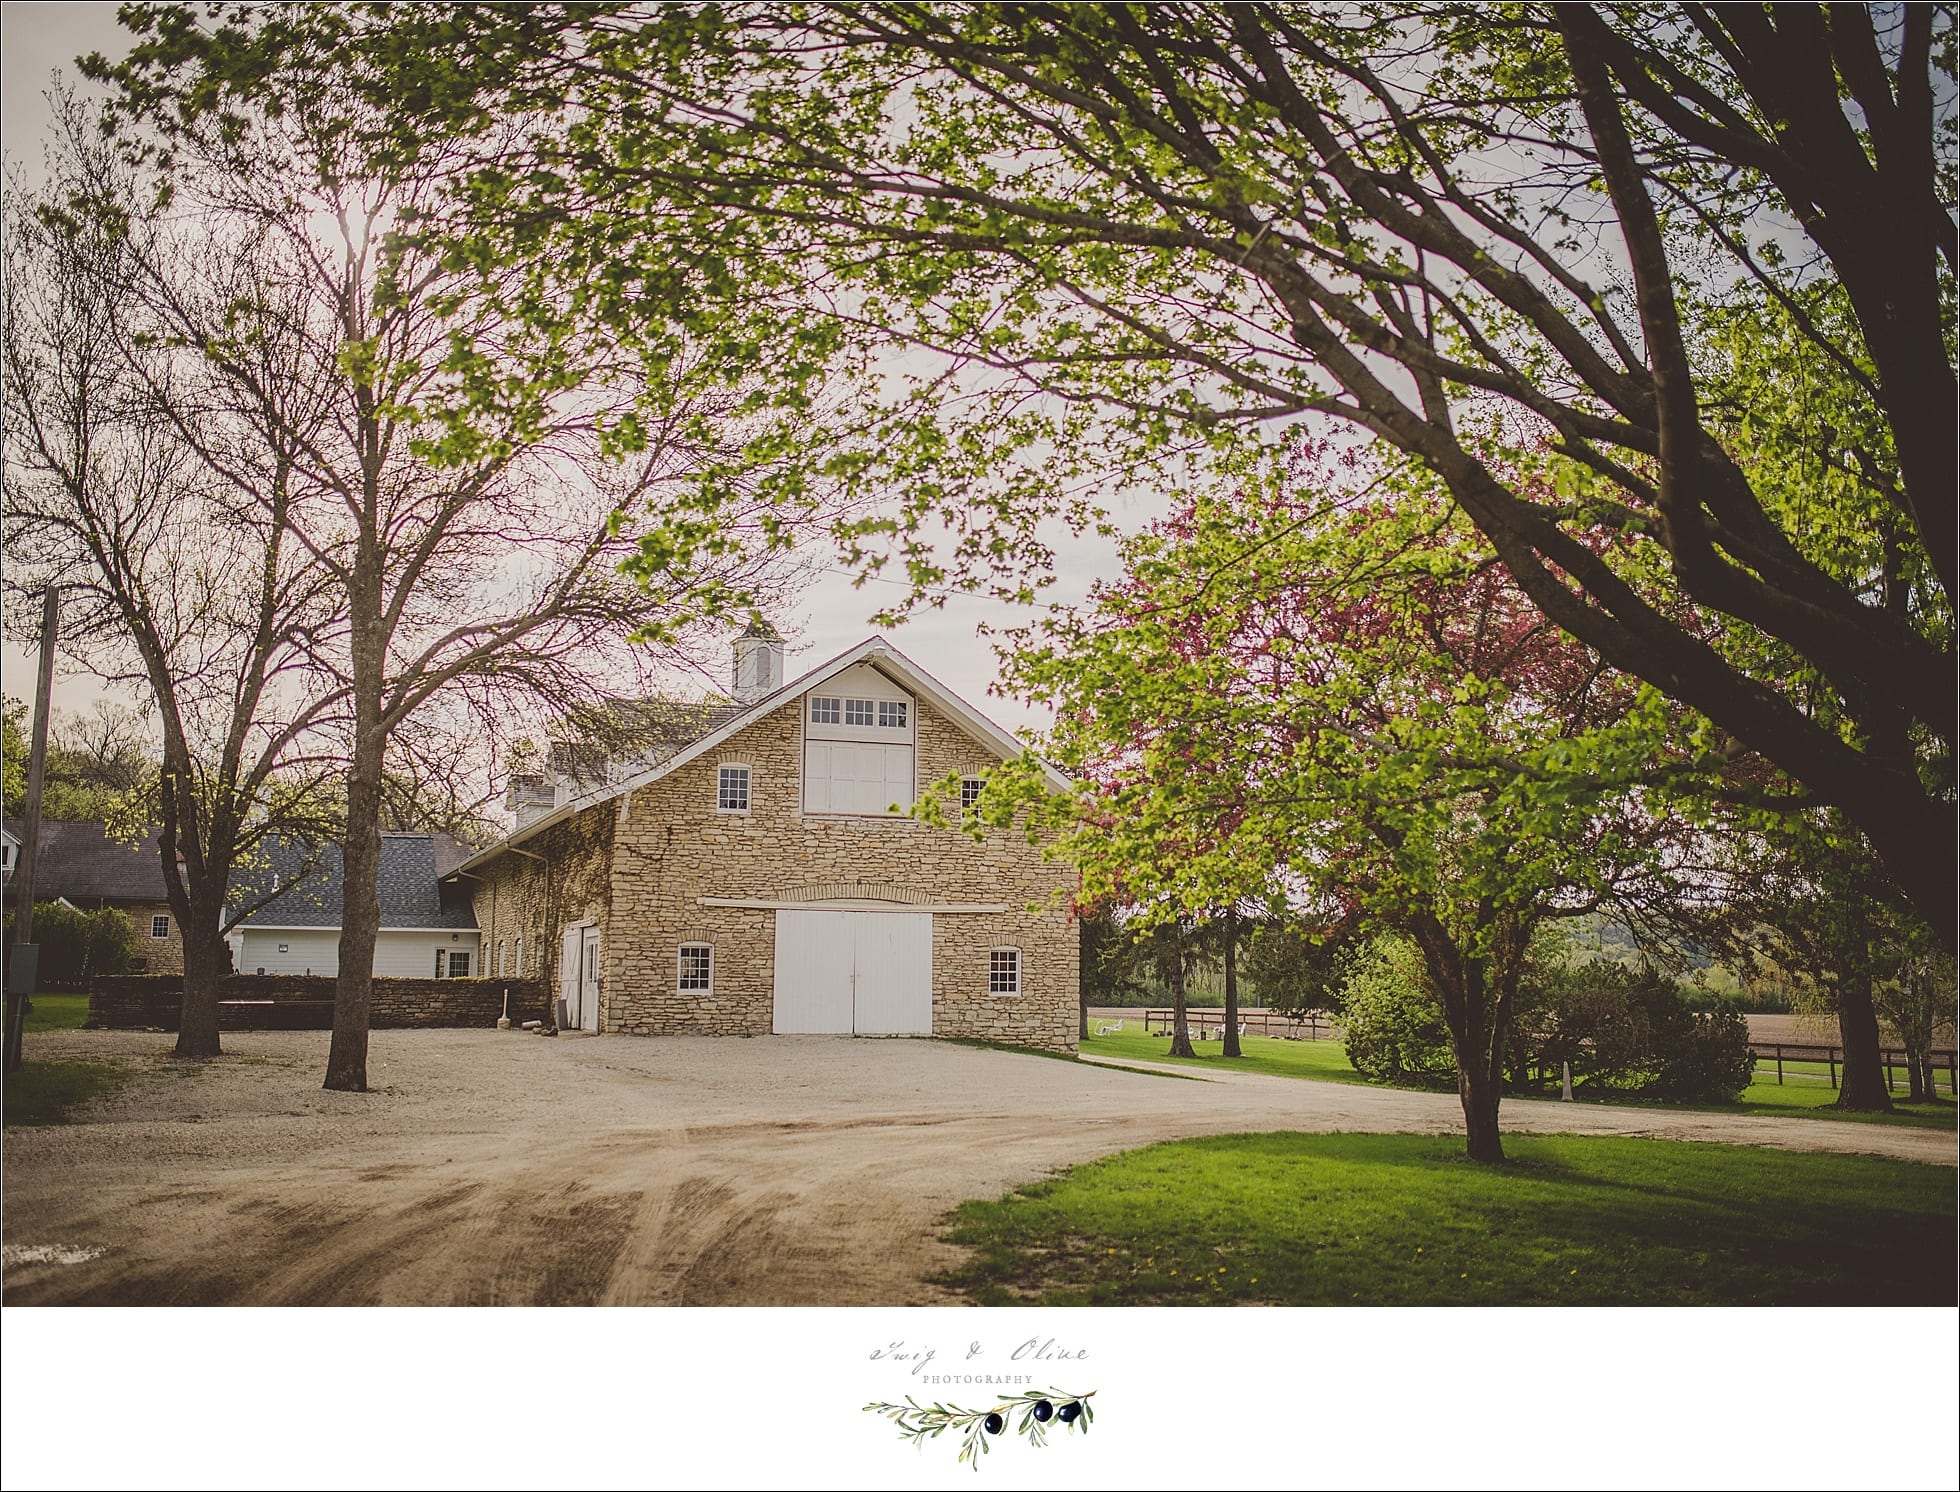 rustic barns, trees, blooms, blossoms, Rochester to Sun Prairie